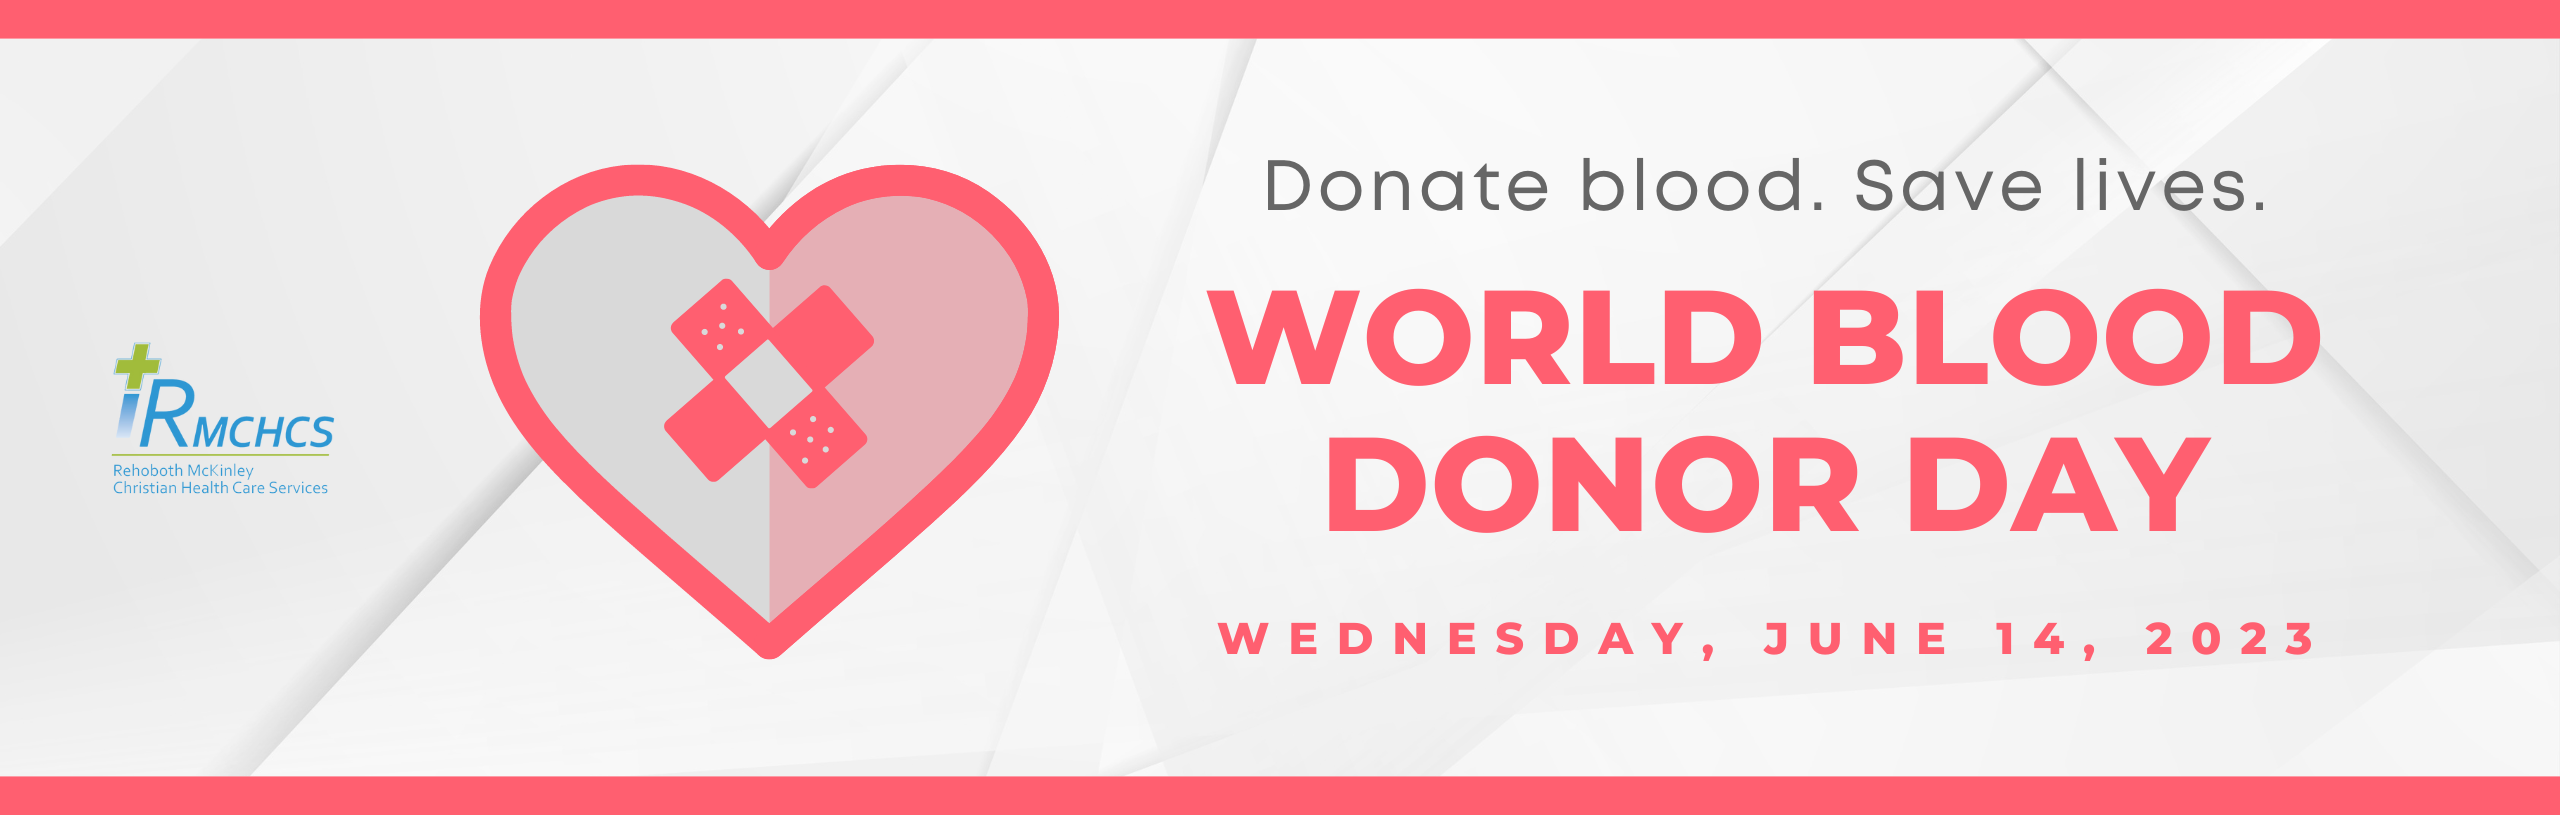 Donate blood. Save lives. World Blood Donor Day. Wednesday, June 14, 2023.